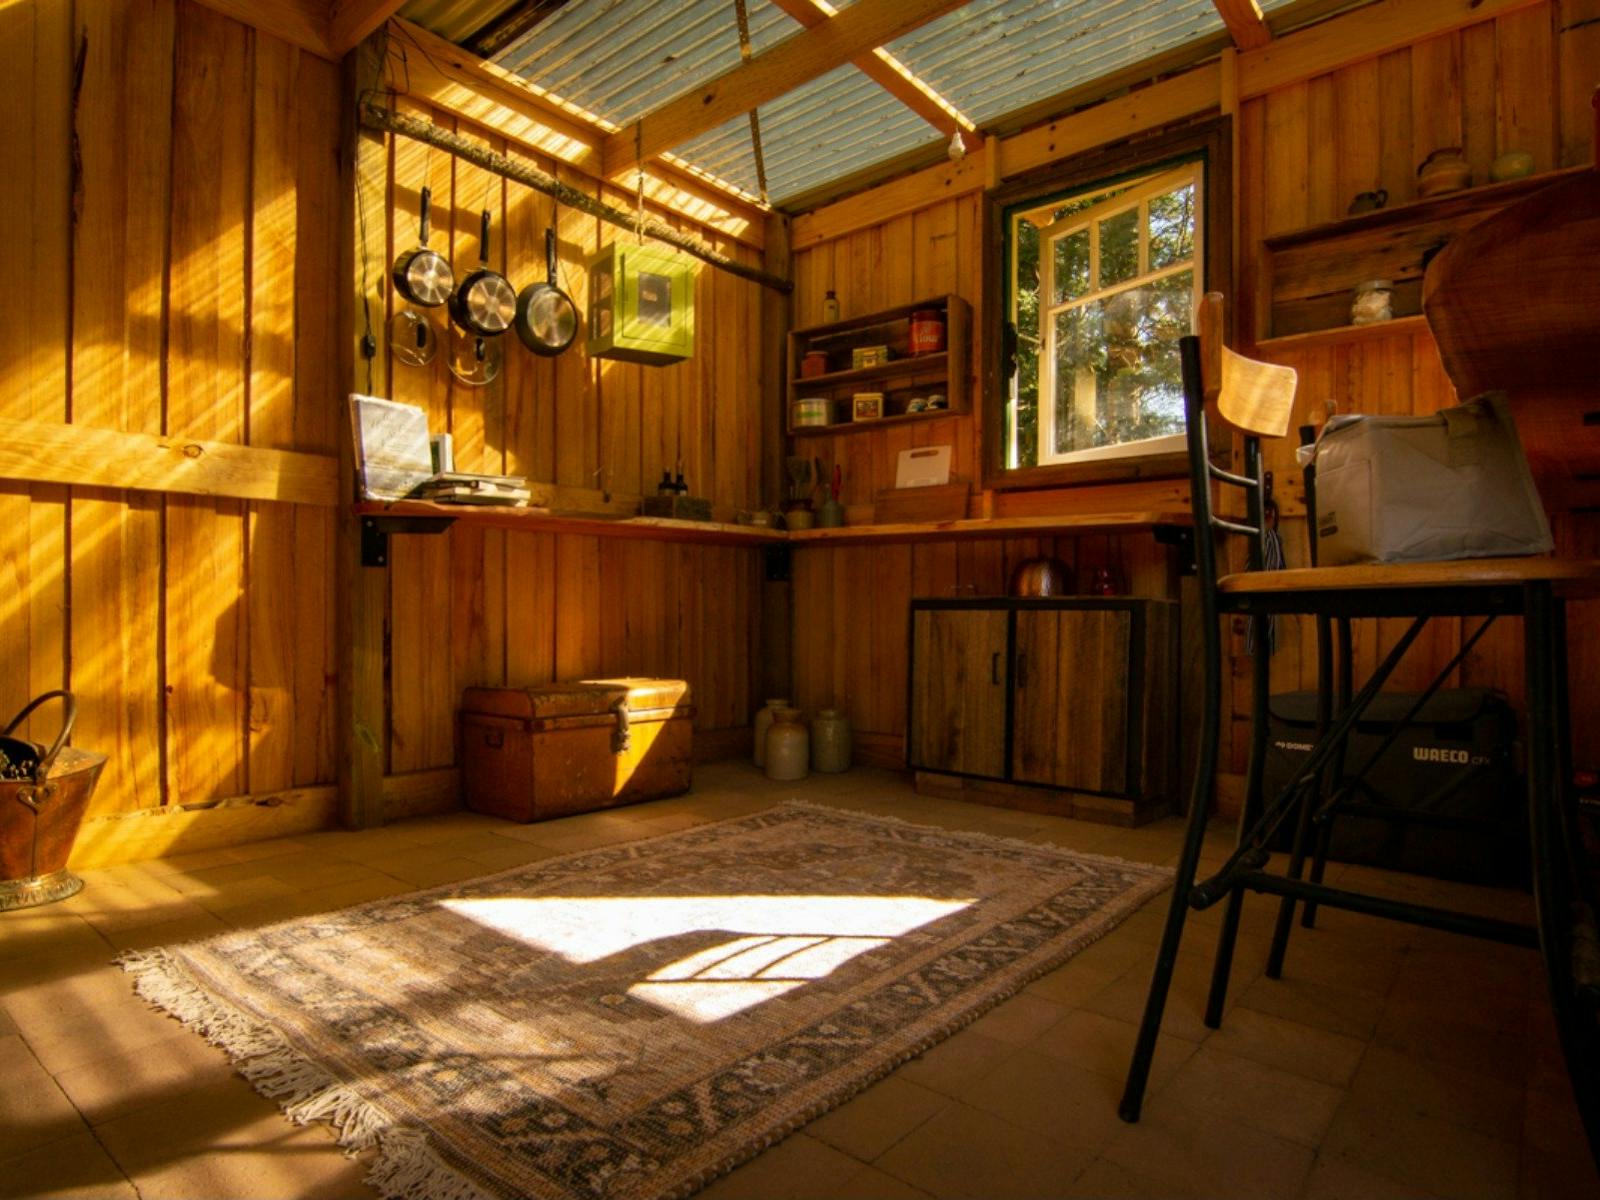 Rustic camp kitchen space with benches, stool seating, cupboards and kitchen equipment.